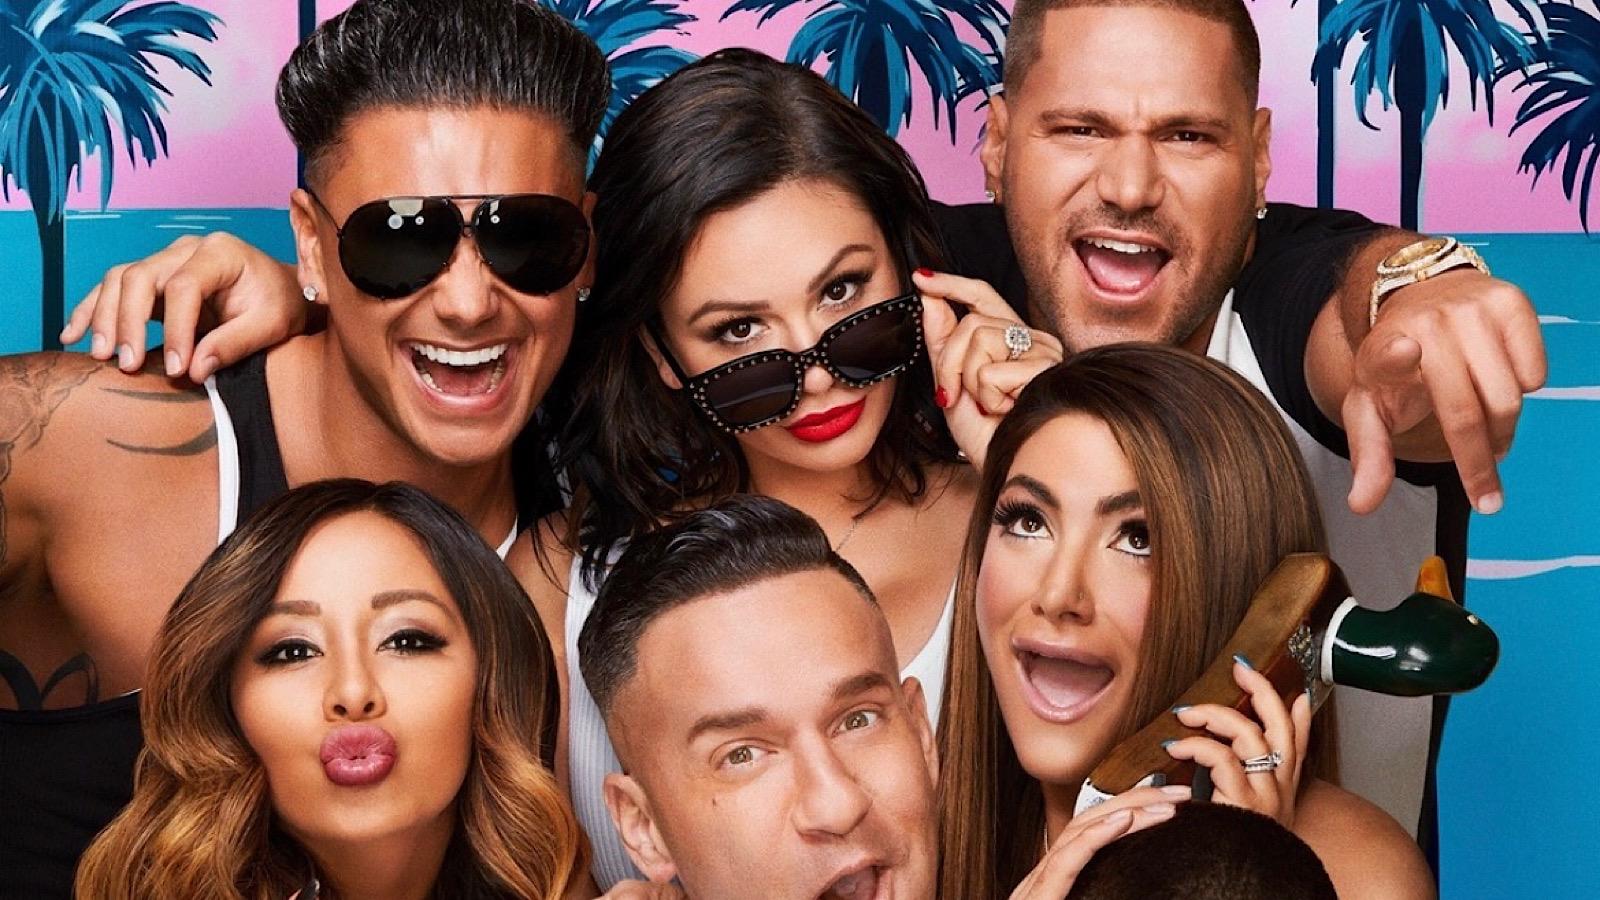 Mtv reality teaa on Instagram: Pauly D just recently celebrated